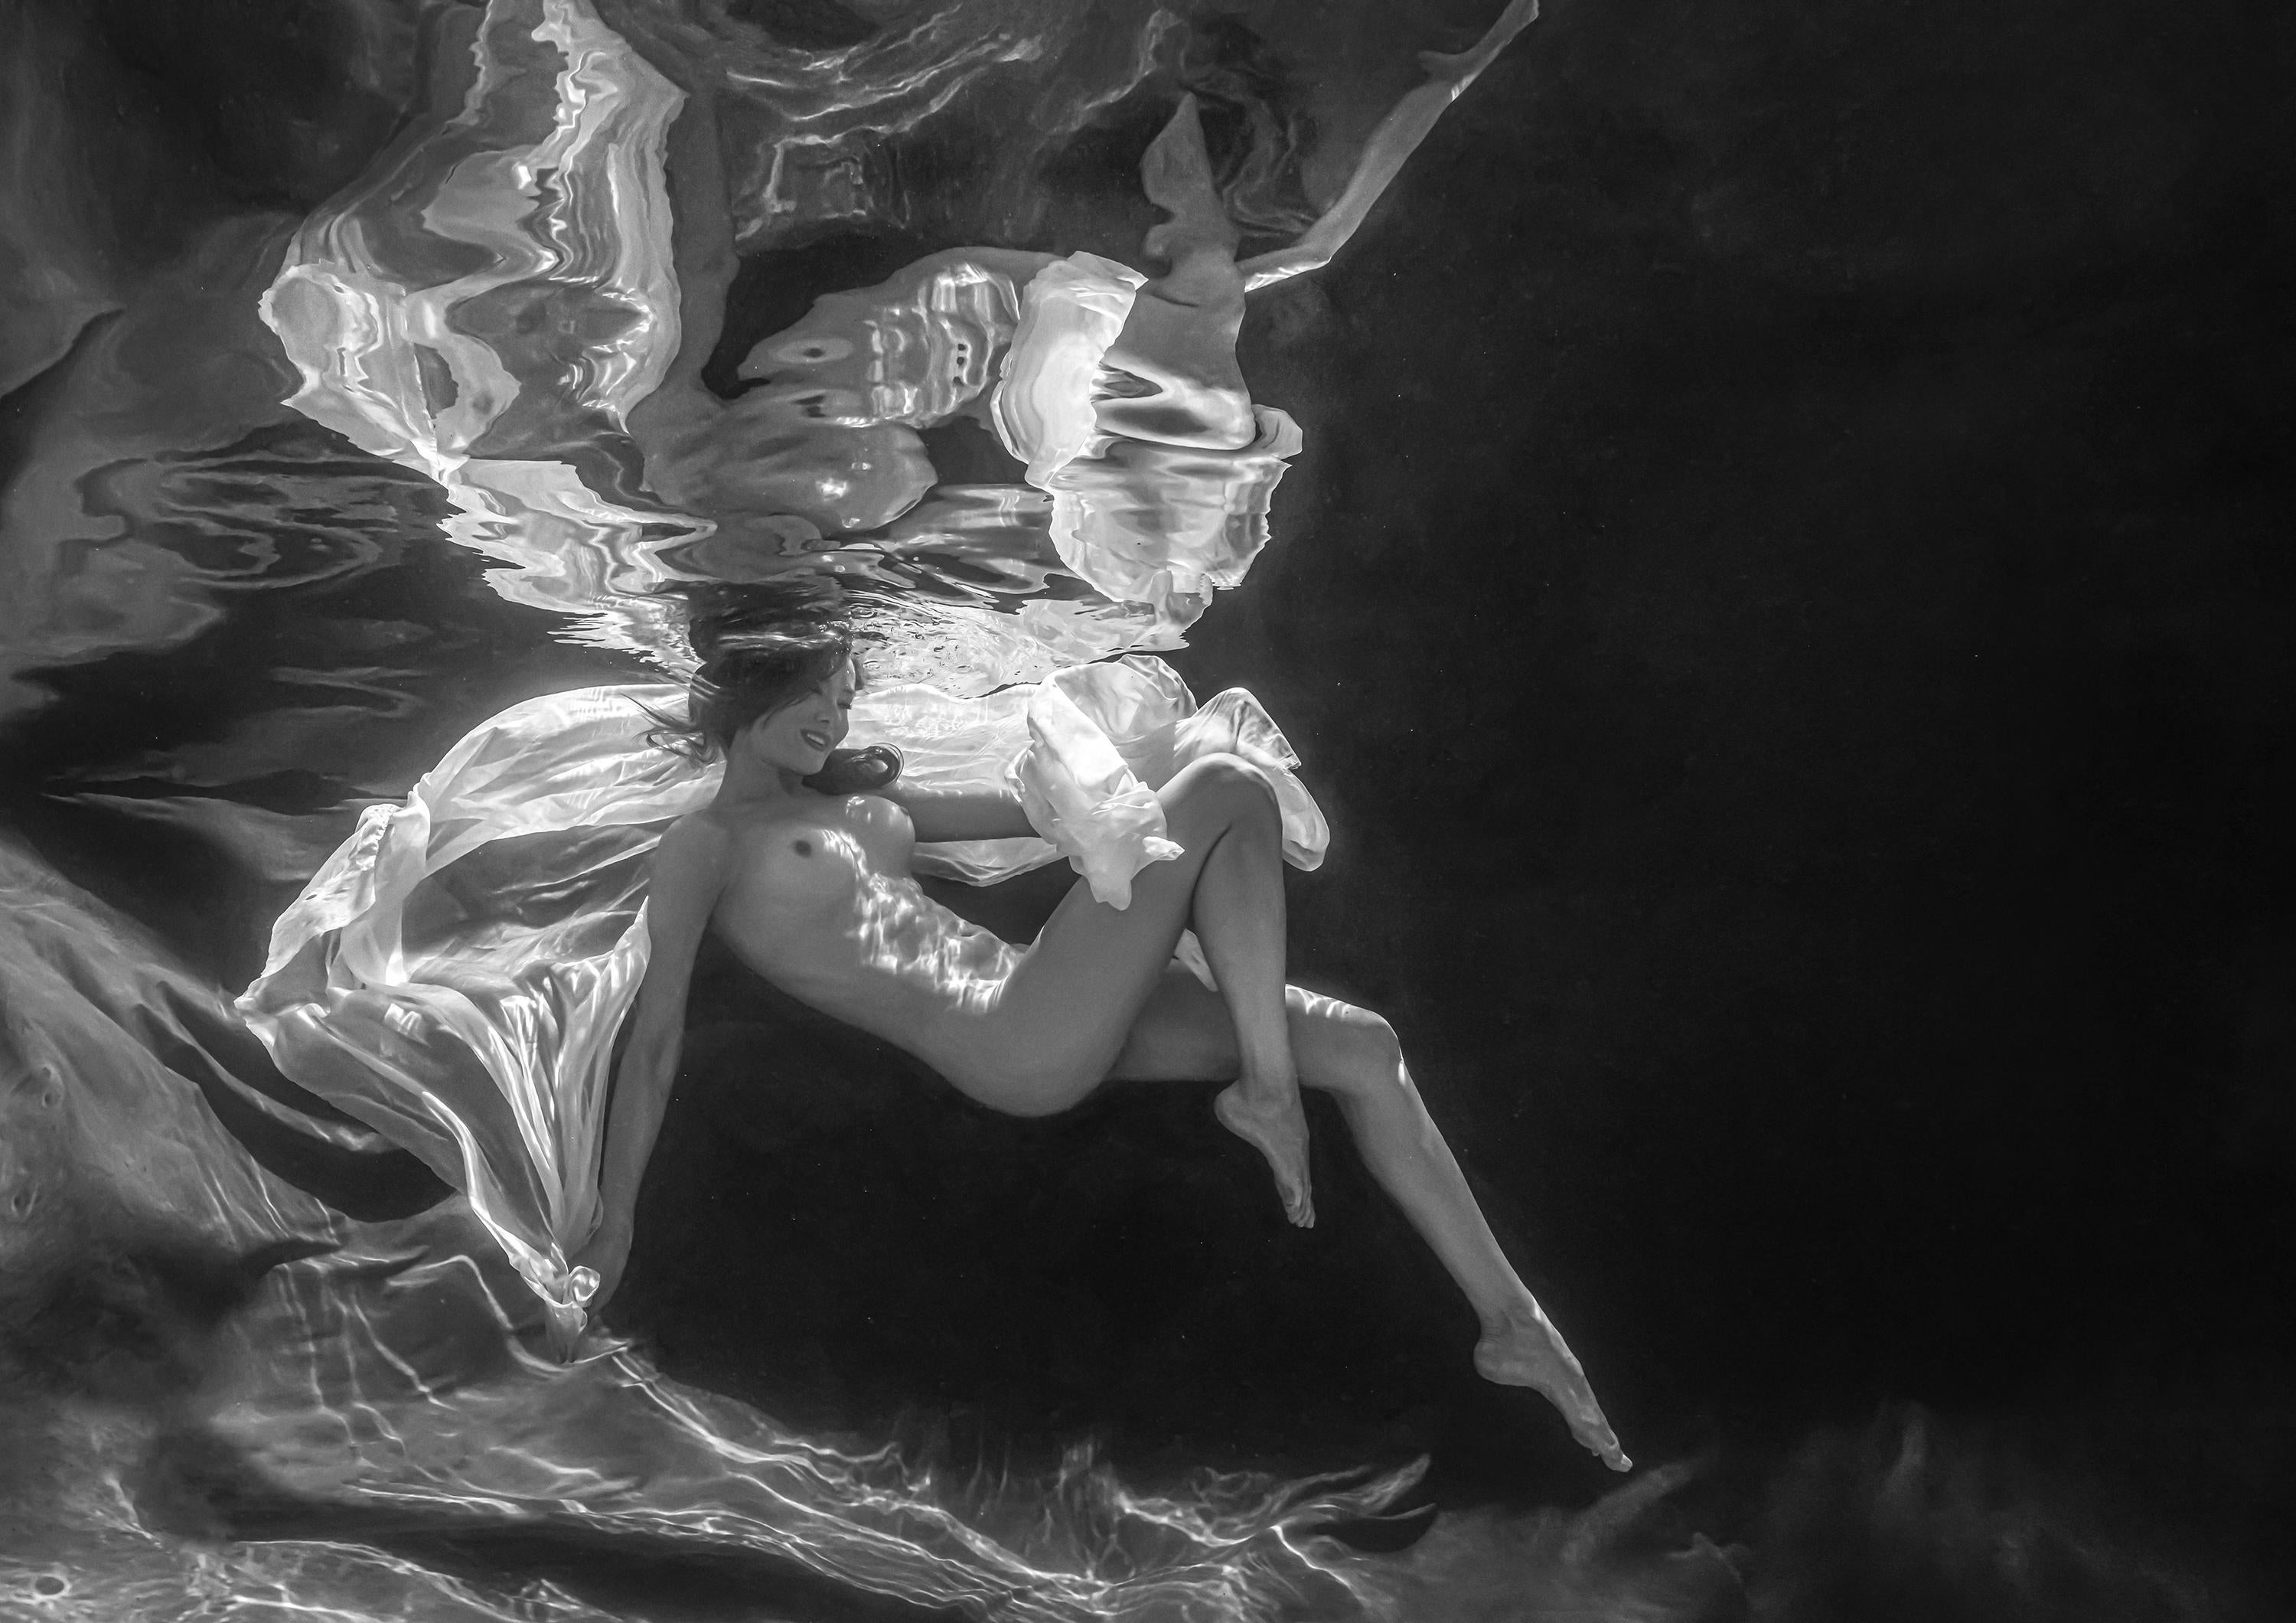 Alex Sher Figurative Photograph - In the Hall of the Mountain King - underwater b&w nude photograph - paper 35x50"